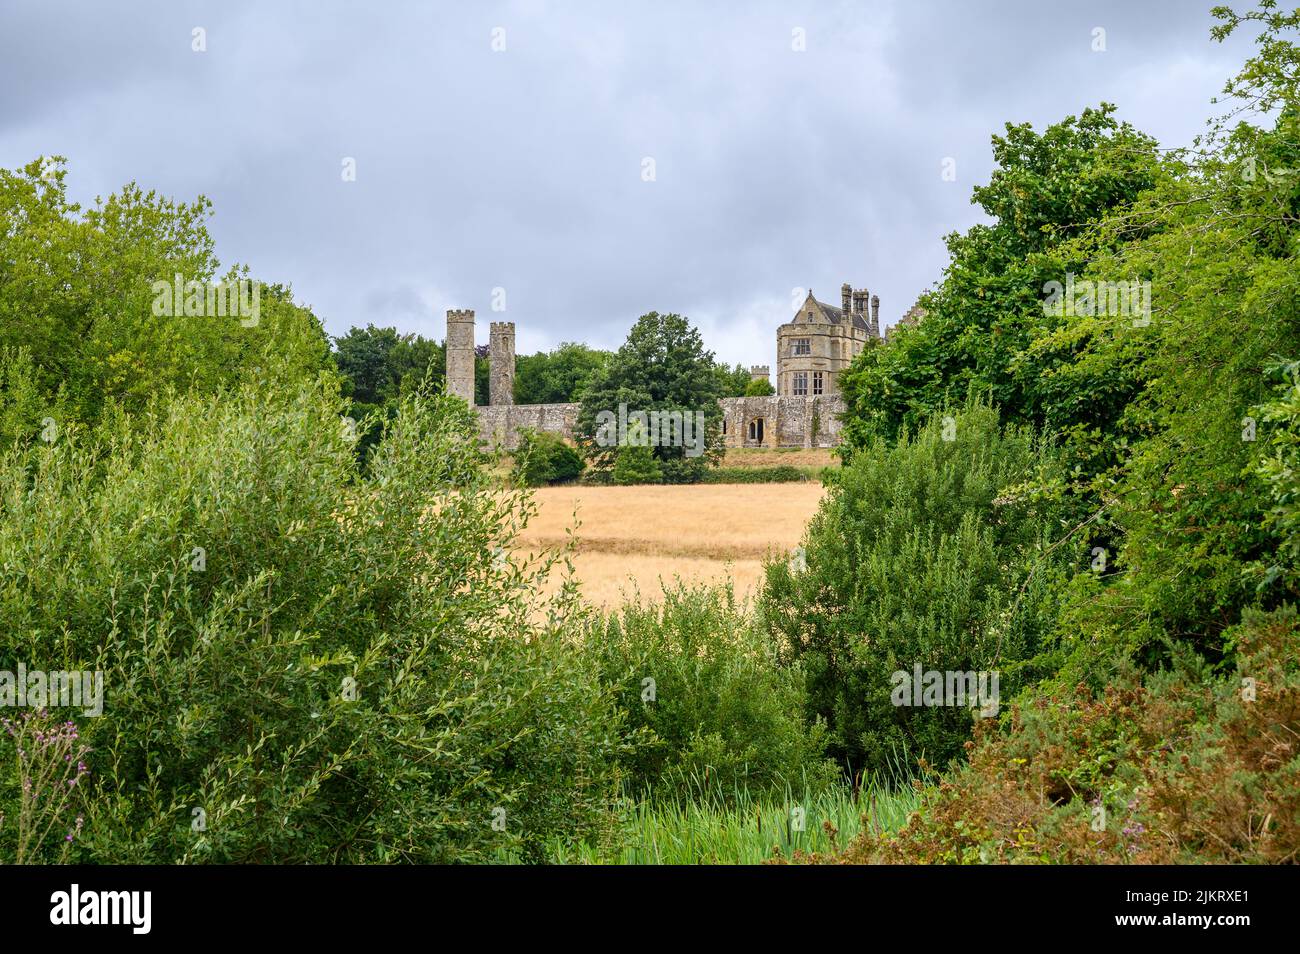 Battle Abbey situated on top of the battlefield of the Battle of Hastings in 1066 with trees and bushes in the foreground, East Sussex, England. Stock Photo